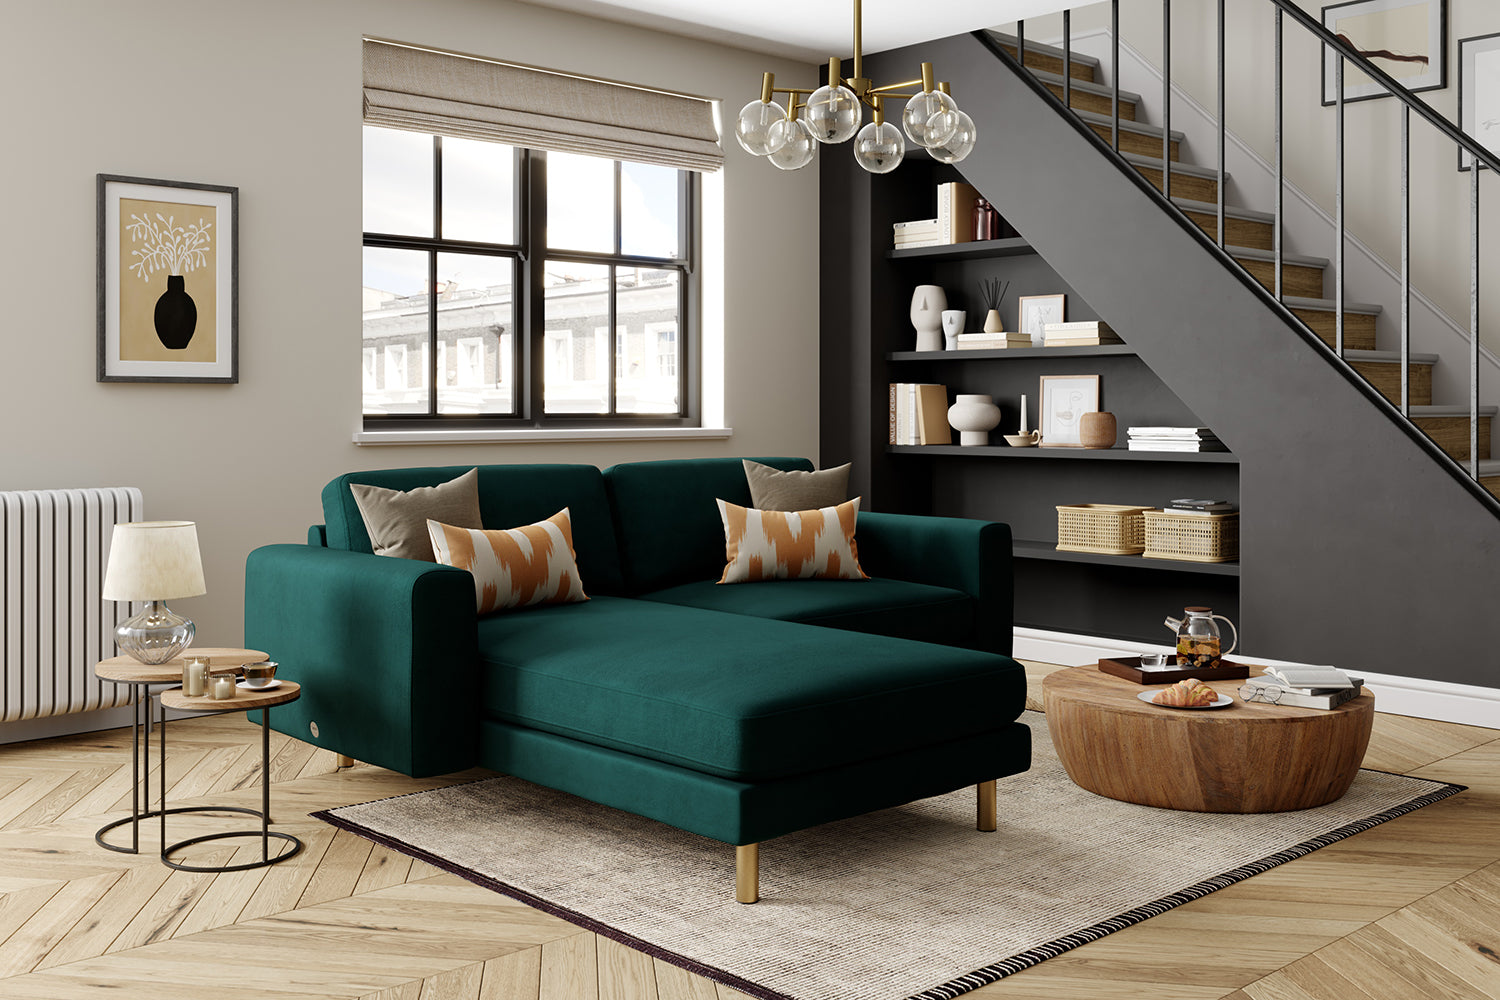 The Big Chill - Left Hand Chaise Sofa - Pine Green